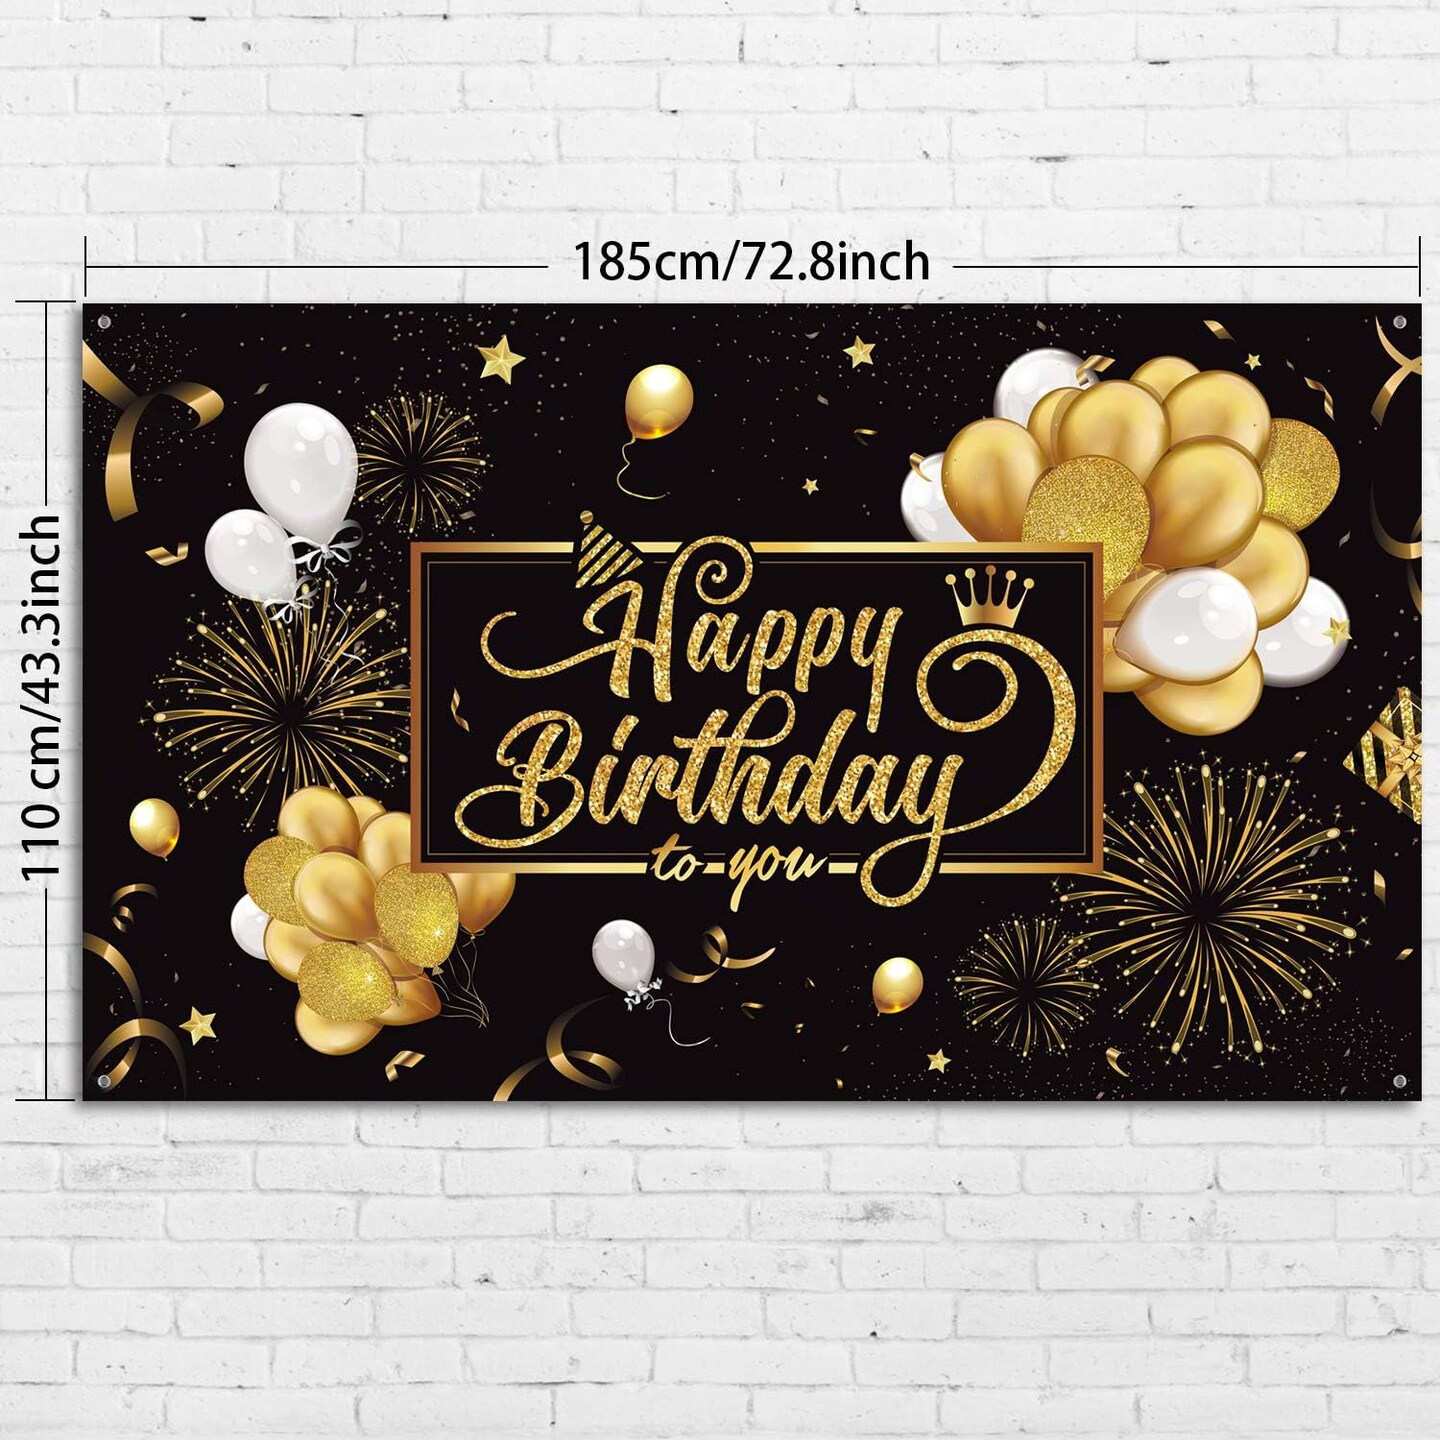 Happy Birthday Backdrop Banner Sign Poster Large Fabric Glitter Balloon Fireworks Sign Birthday Photo Backdrop Background for Birthday Party Decoration Supplies, 72.8 x 43.3in (Black and Gold)